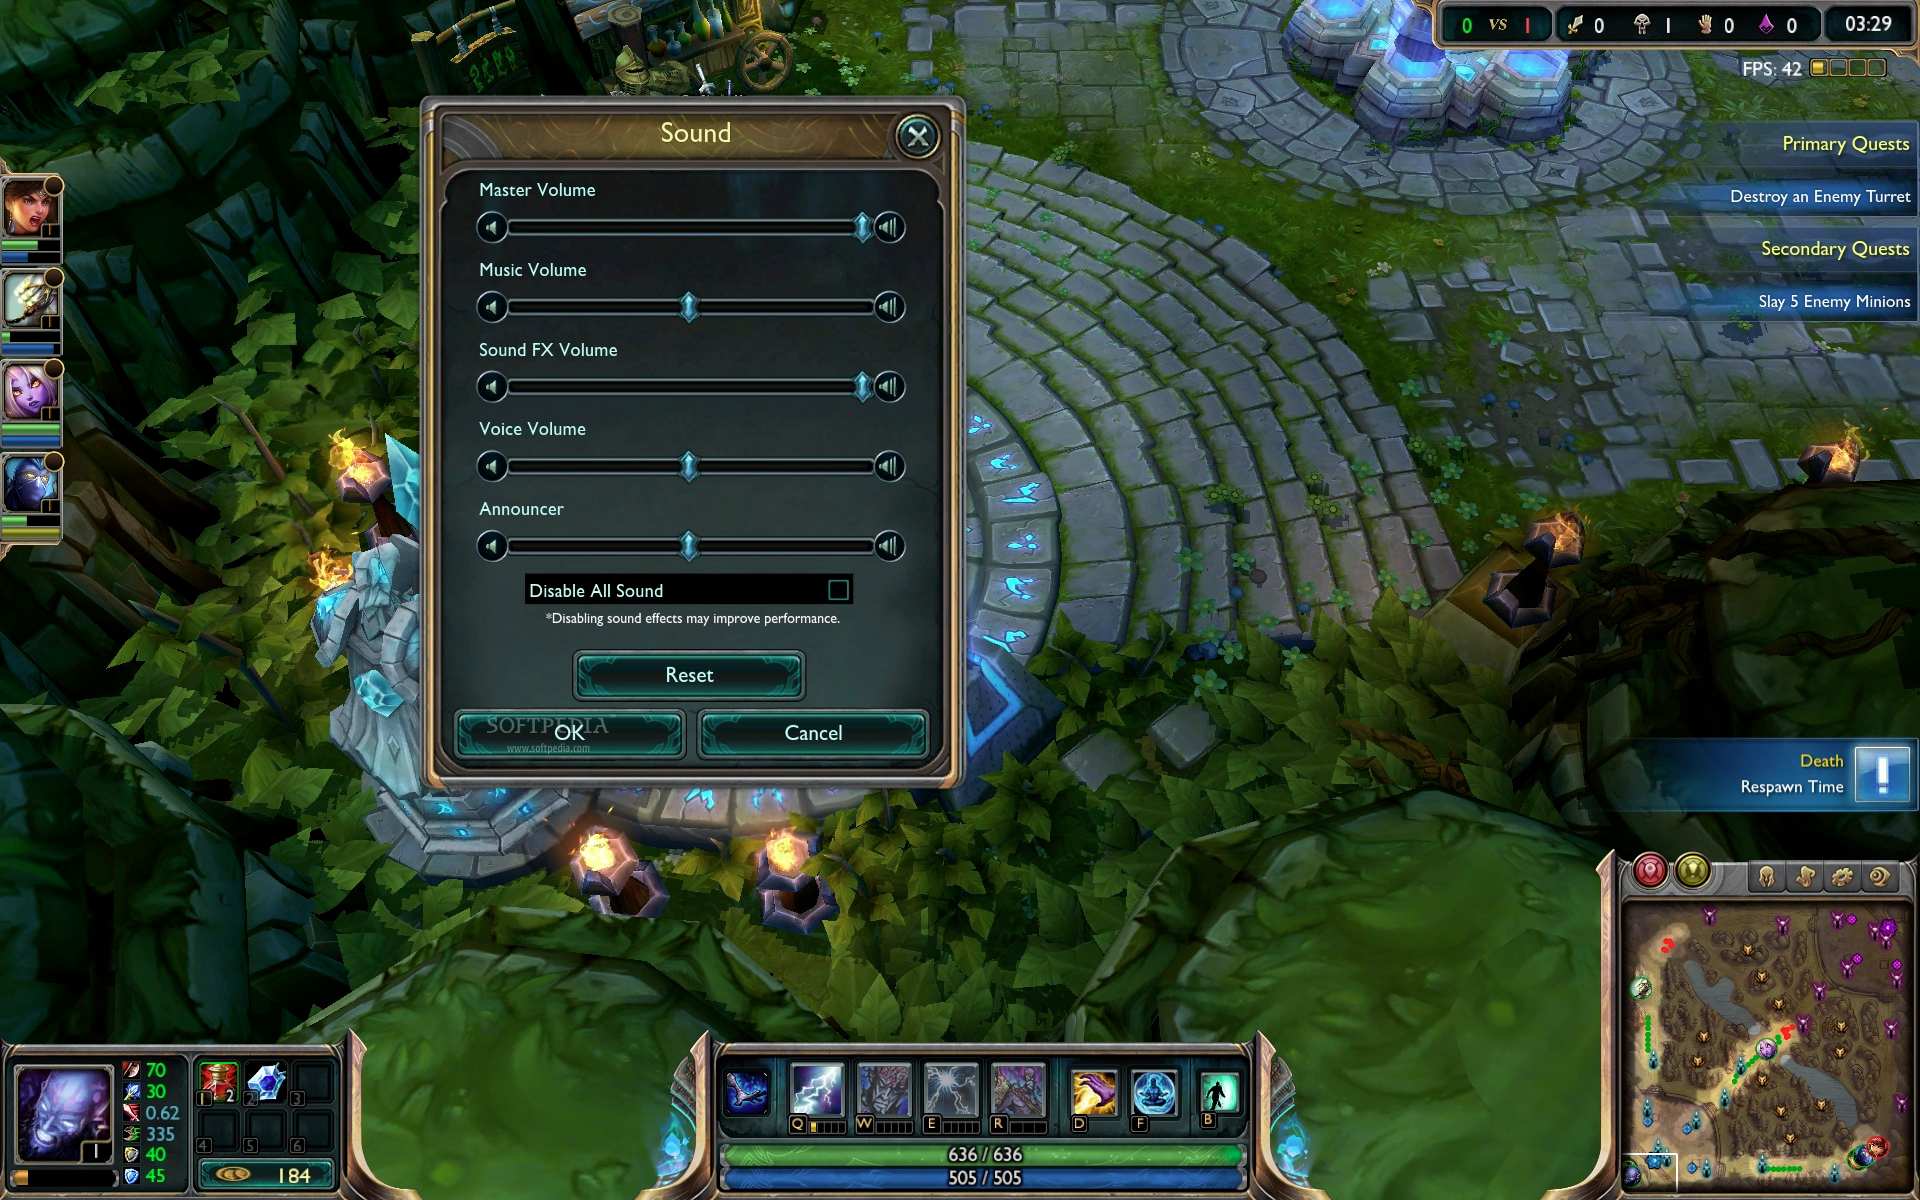 league of legends for mac download 2015